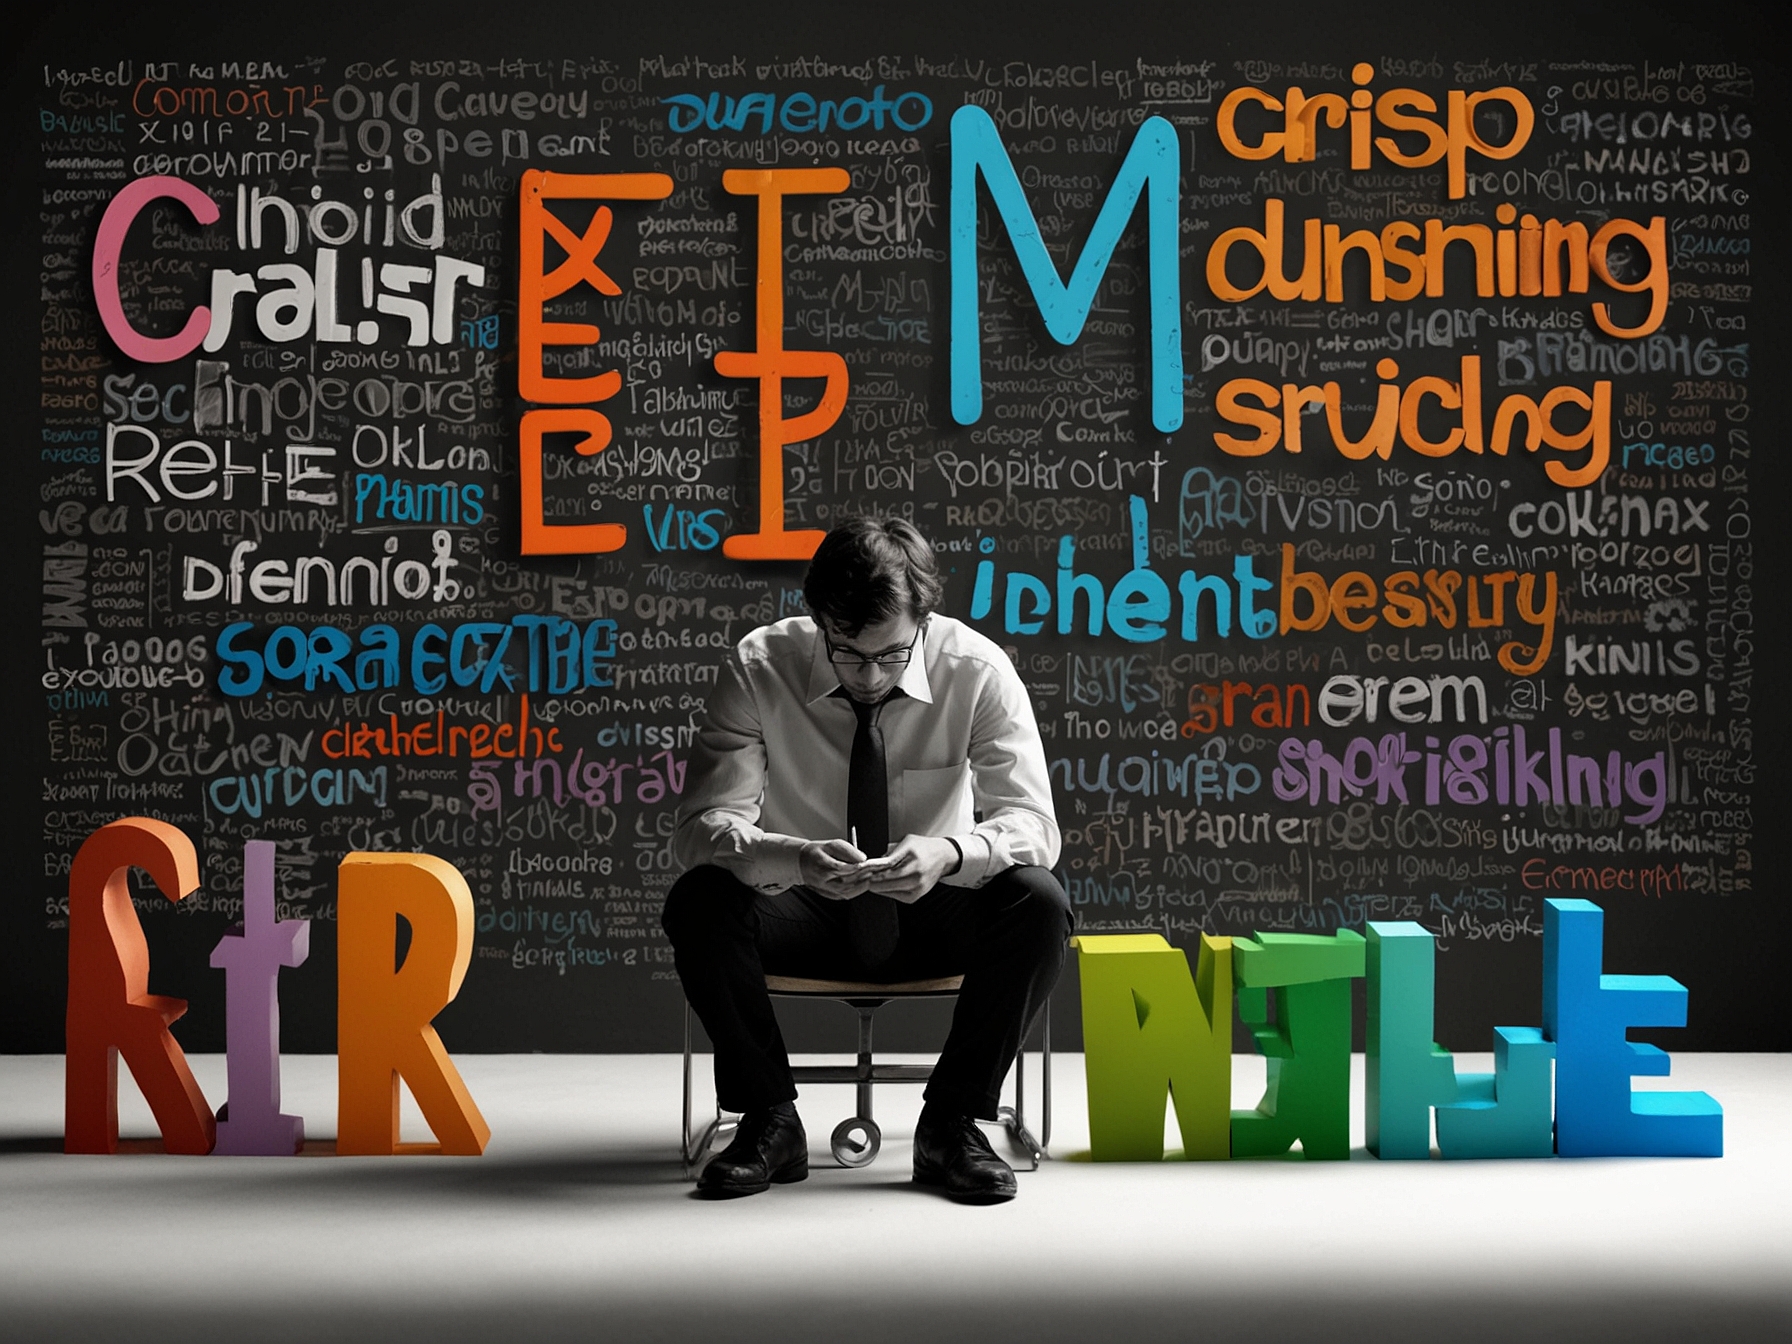 A visual depicting a person pondering over a Wordle game, surrounded by floating letters and words like 'CRISP' and 'PALM', symbolizing the strategic thinking involved.